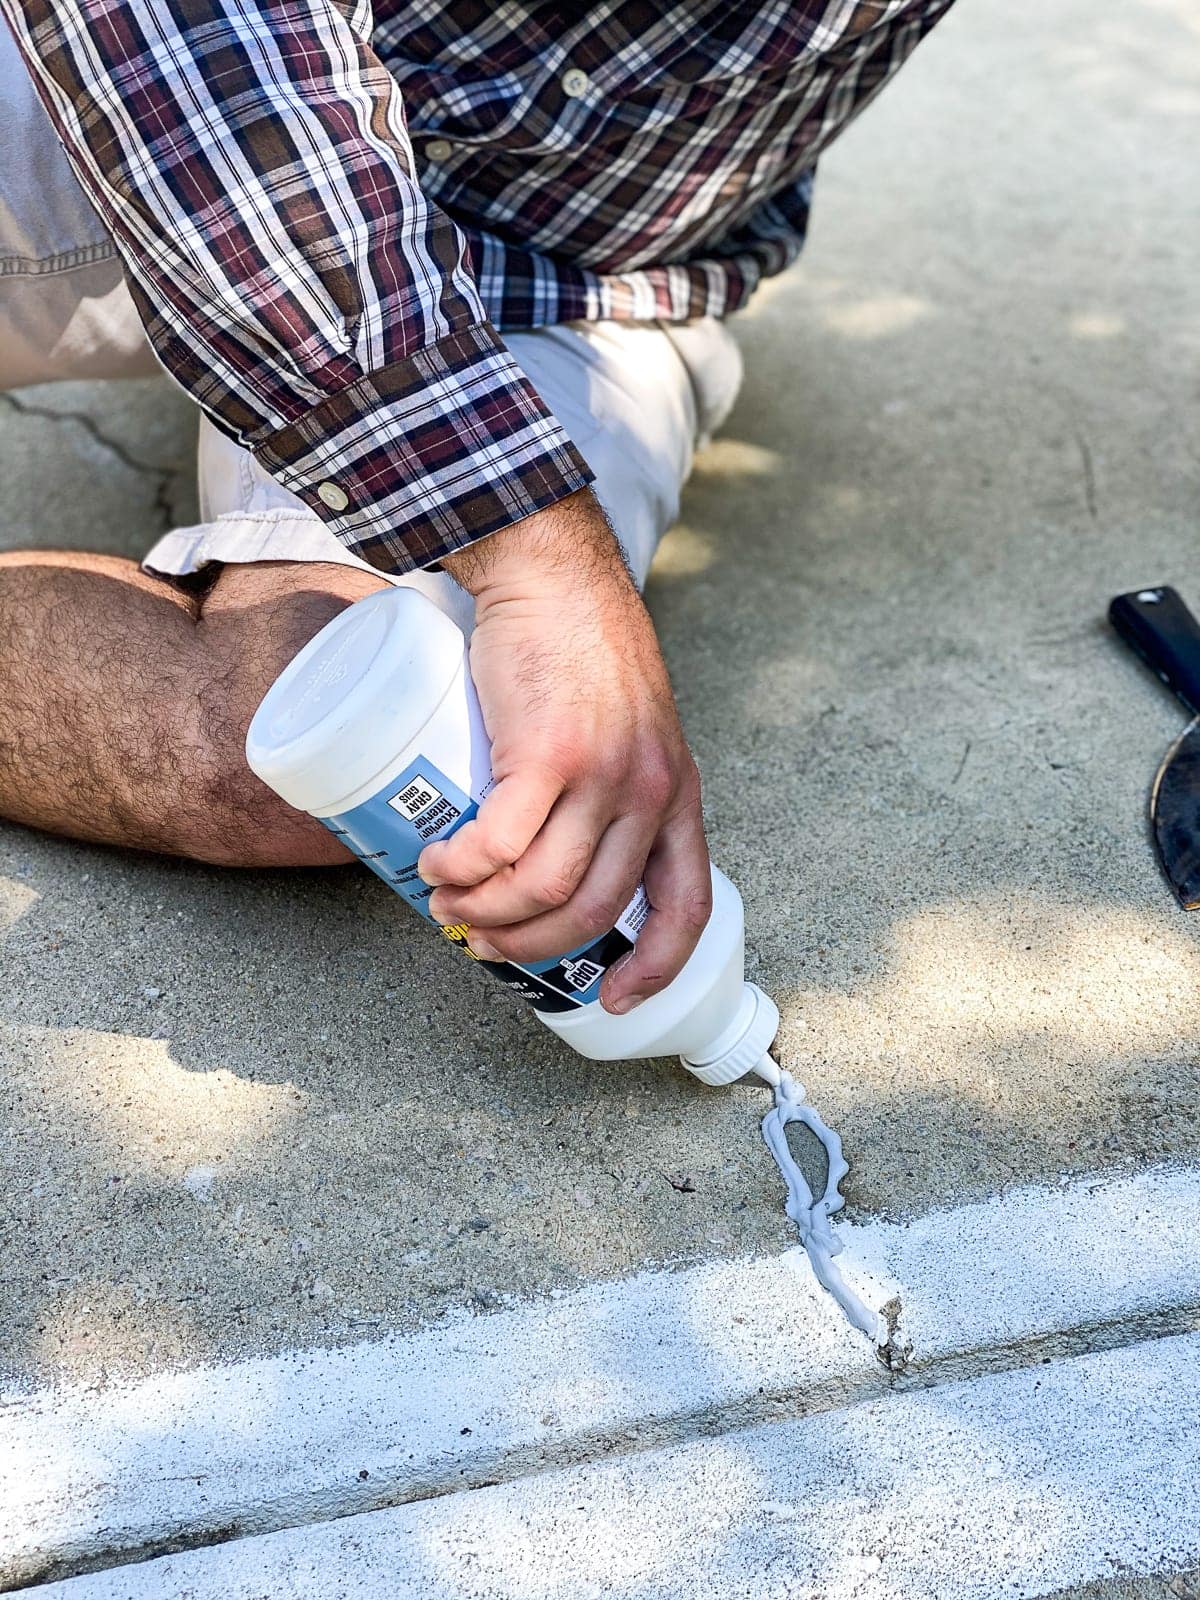 applying concrete filler to fill cracks and holes before painting